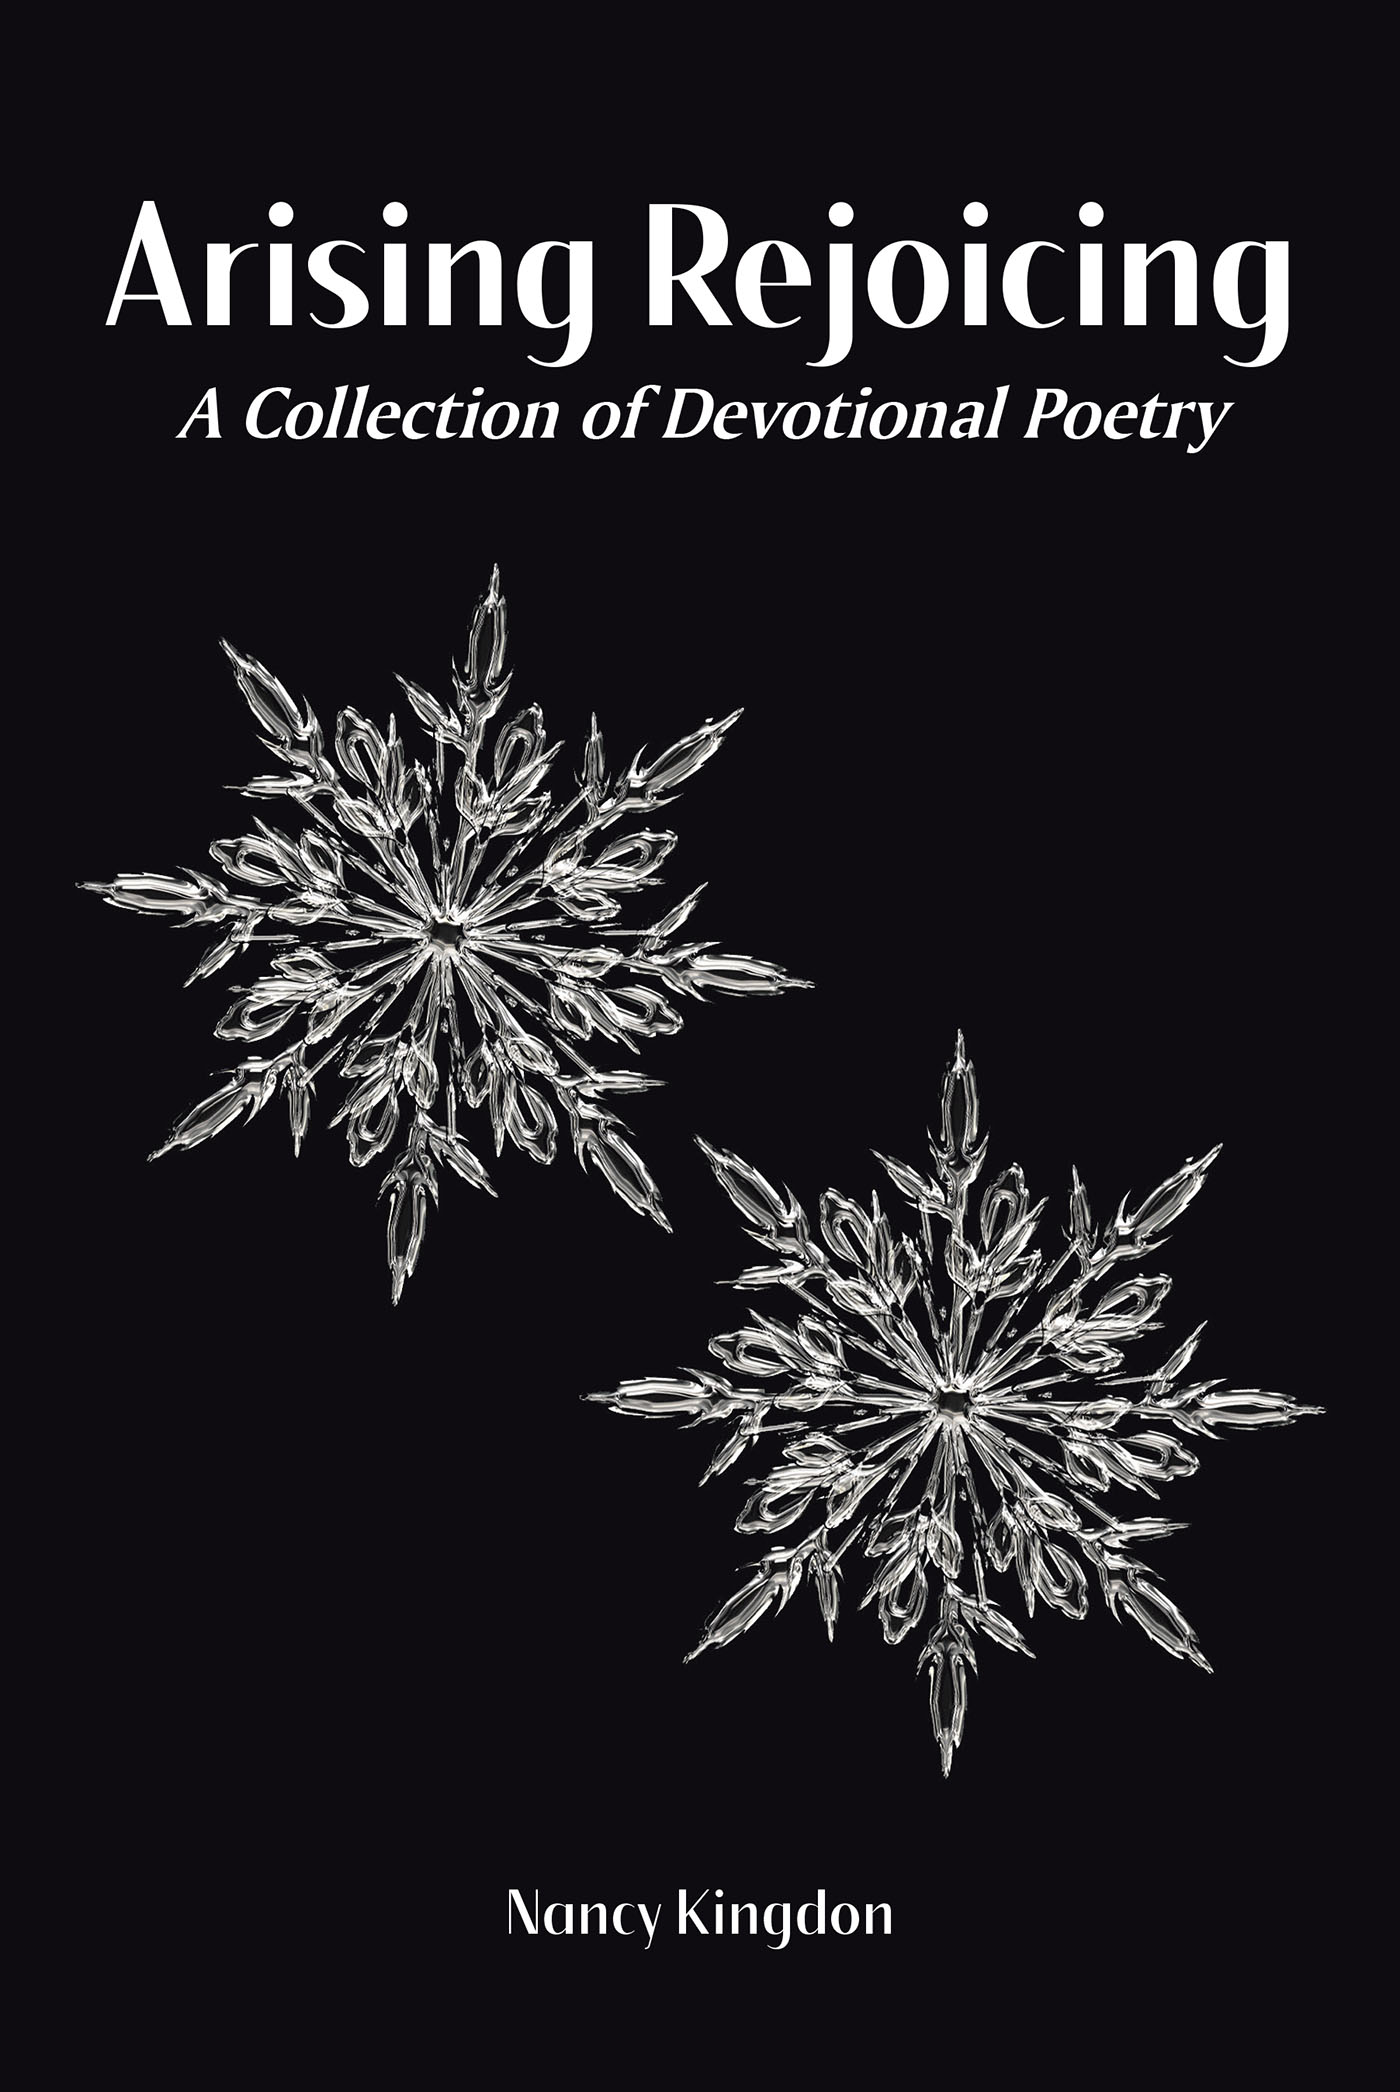 Nancy Kingdon’s Newly Released “Arising Rejoicing: A Collection of Devotional Poetry” is a Carefully Structured Resource for Inspiration and Empowerment